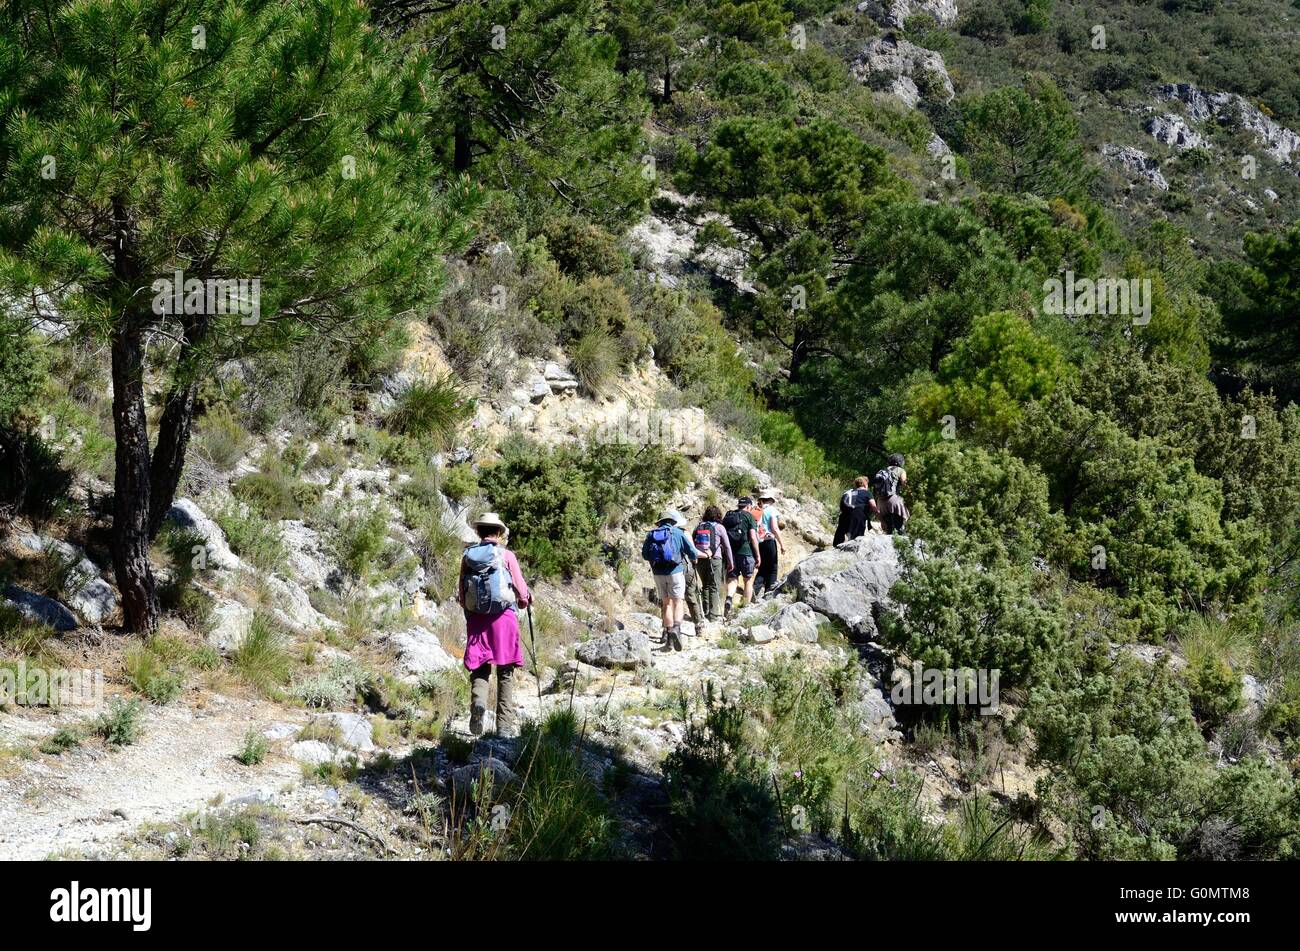 Hikers on the ancient silk route through limestone landscapes Sierra Tejeda Spanish National Park Andalusia Malaga Region Spain Stock Photo